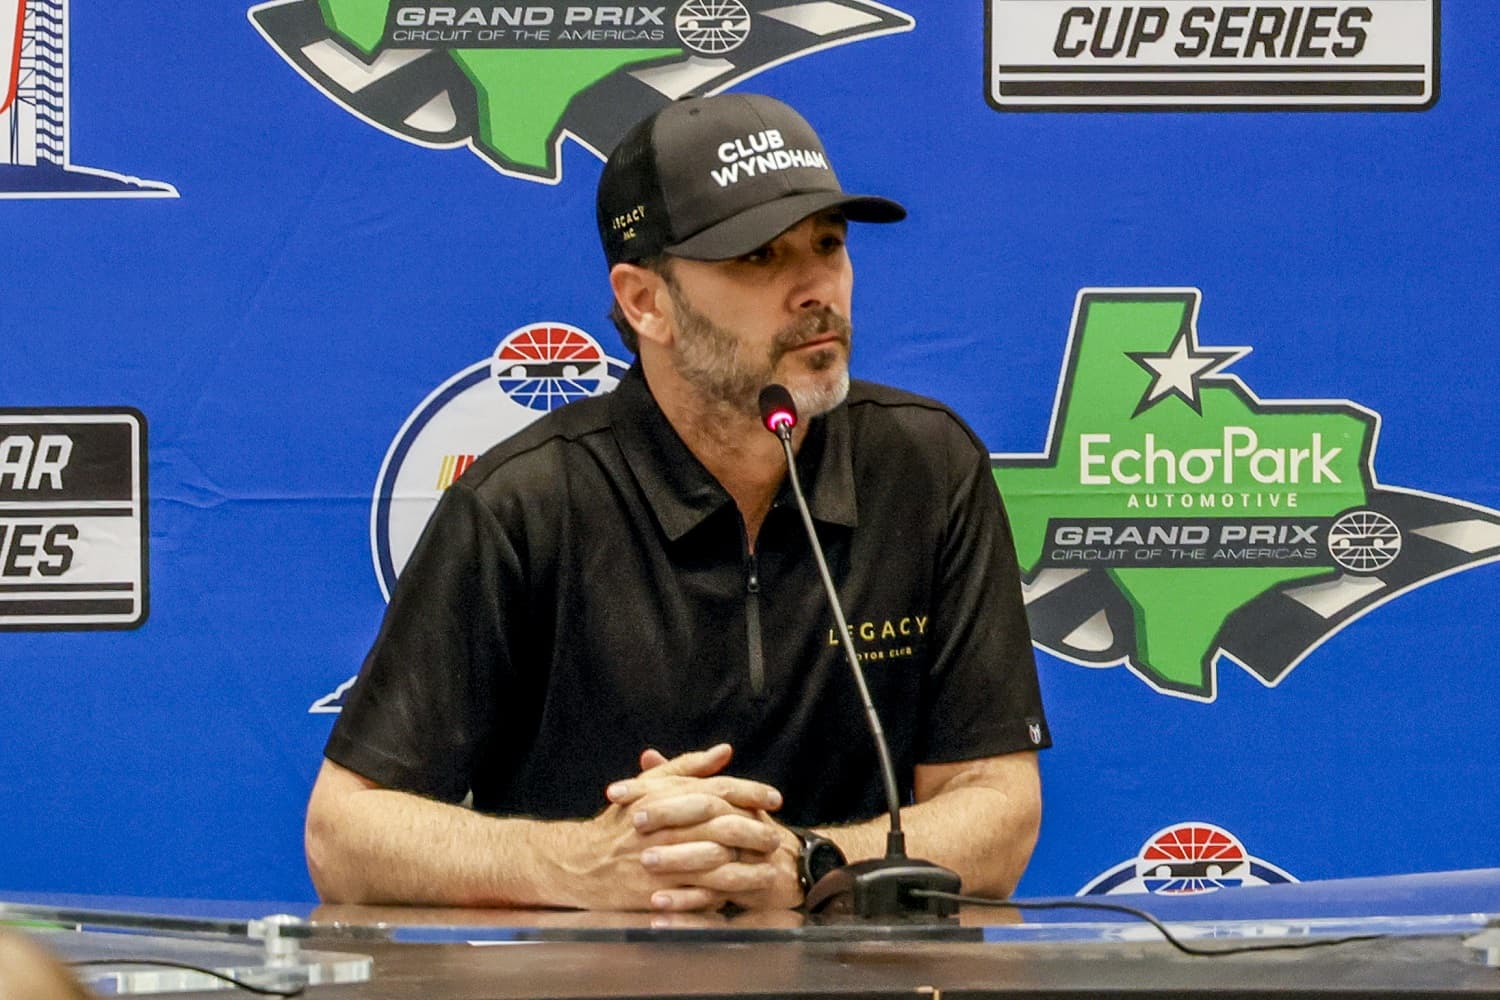 Jimmie Johnson talks to the media after practice for the NASCAR Cup Series EchoPark Automotive Grand Prix on March 24, 2023 at Circuit of the Americas.